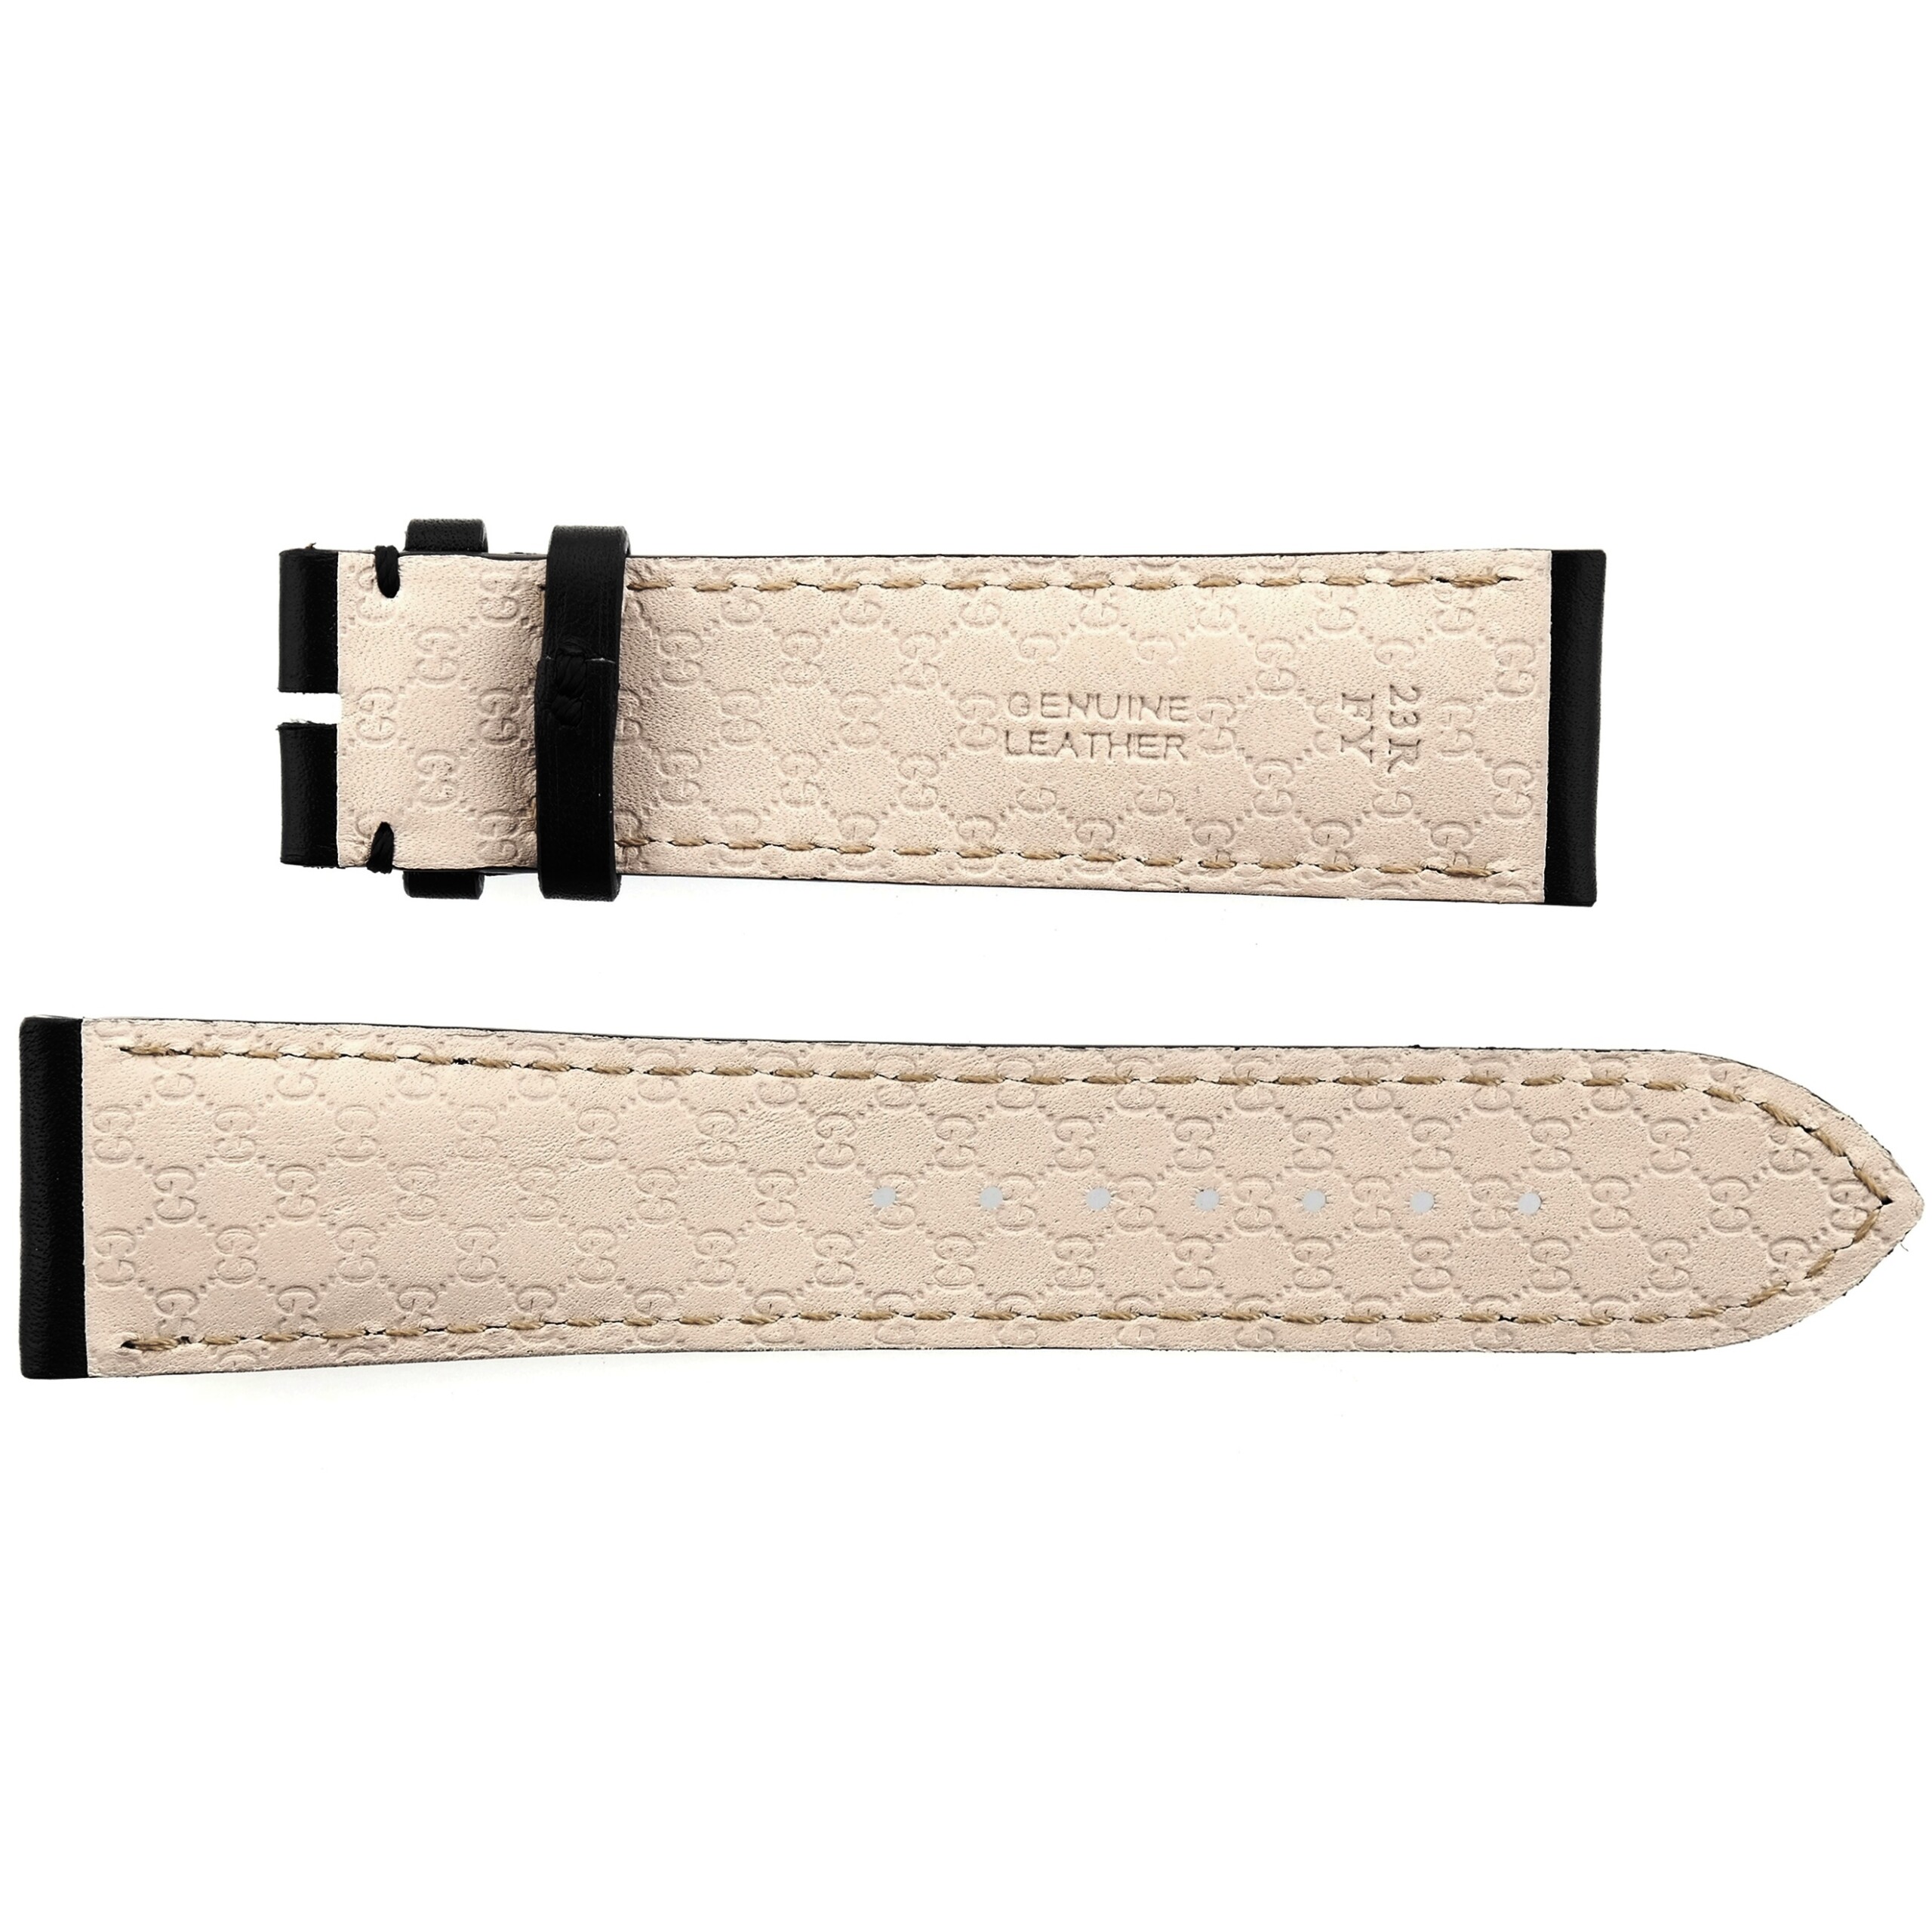 Authentic GUCCI Watch Strap - Leather - Ref. 23R FY - 23/18 80/120